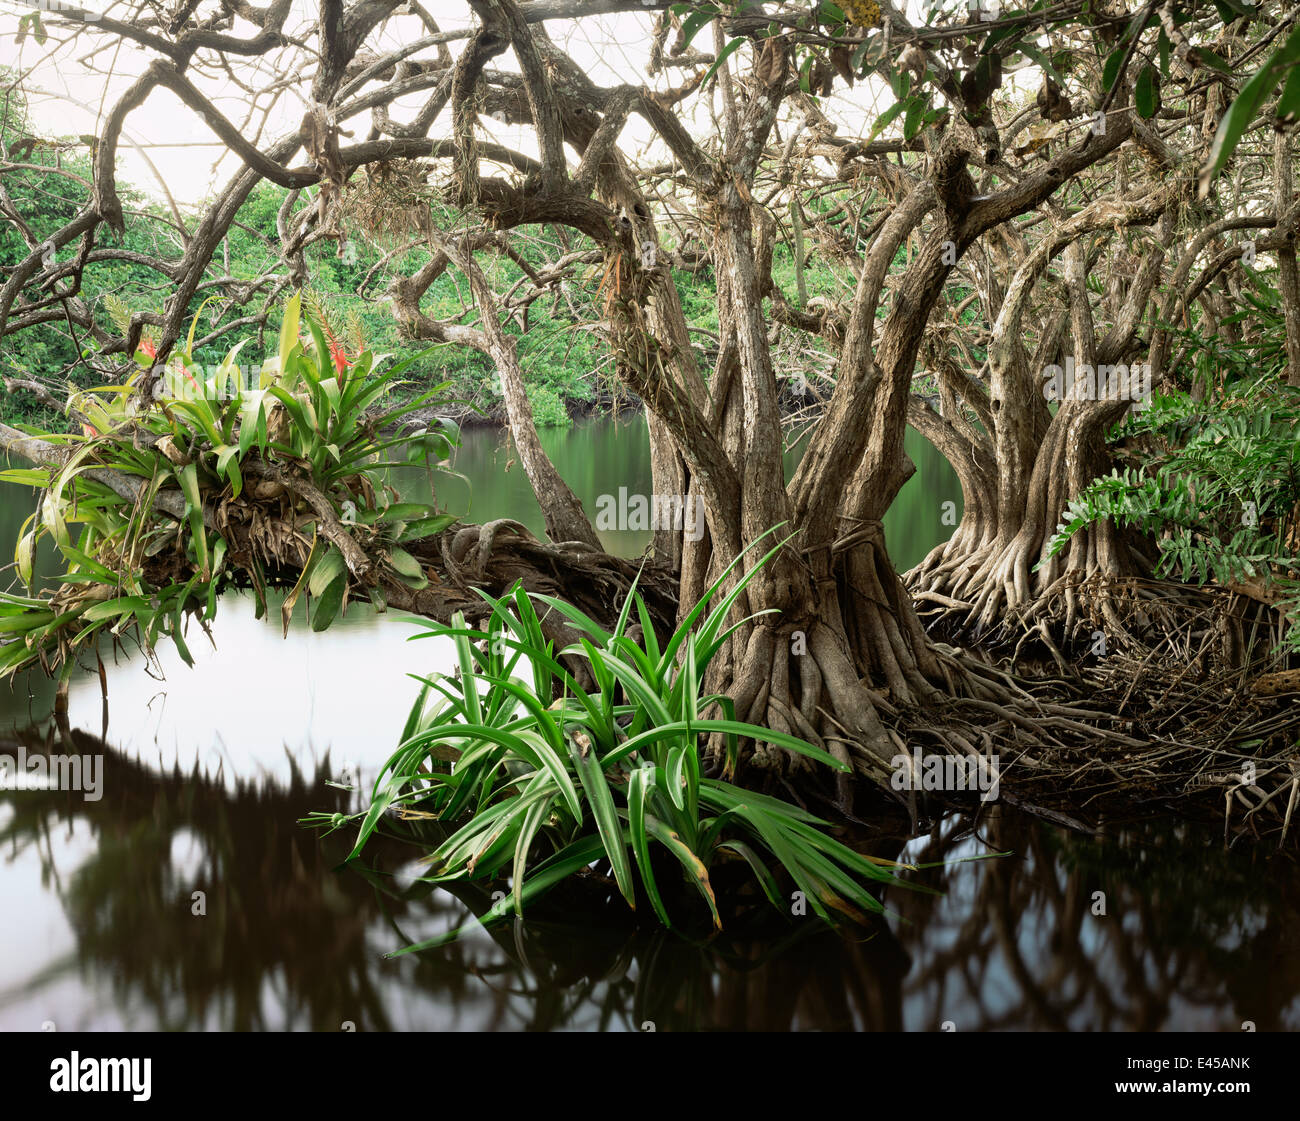 Anonilla (Rollinia jimenezii) and Crinum Lilies (Crinum scabrum) in the roots of a Mangrove (Rhizophora mangle), with Bromeliads (Bromeliaceae) growing in the branches, La Tovara Wetlands, San Blas, Mexico, Central America Stock Photo